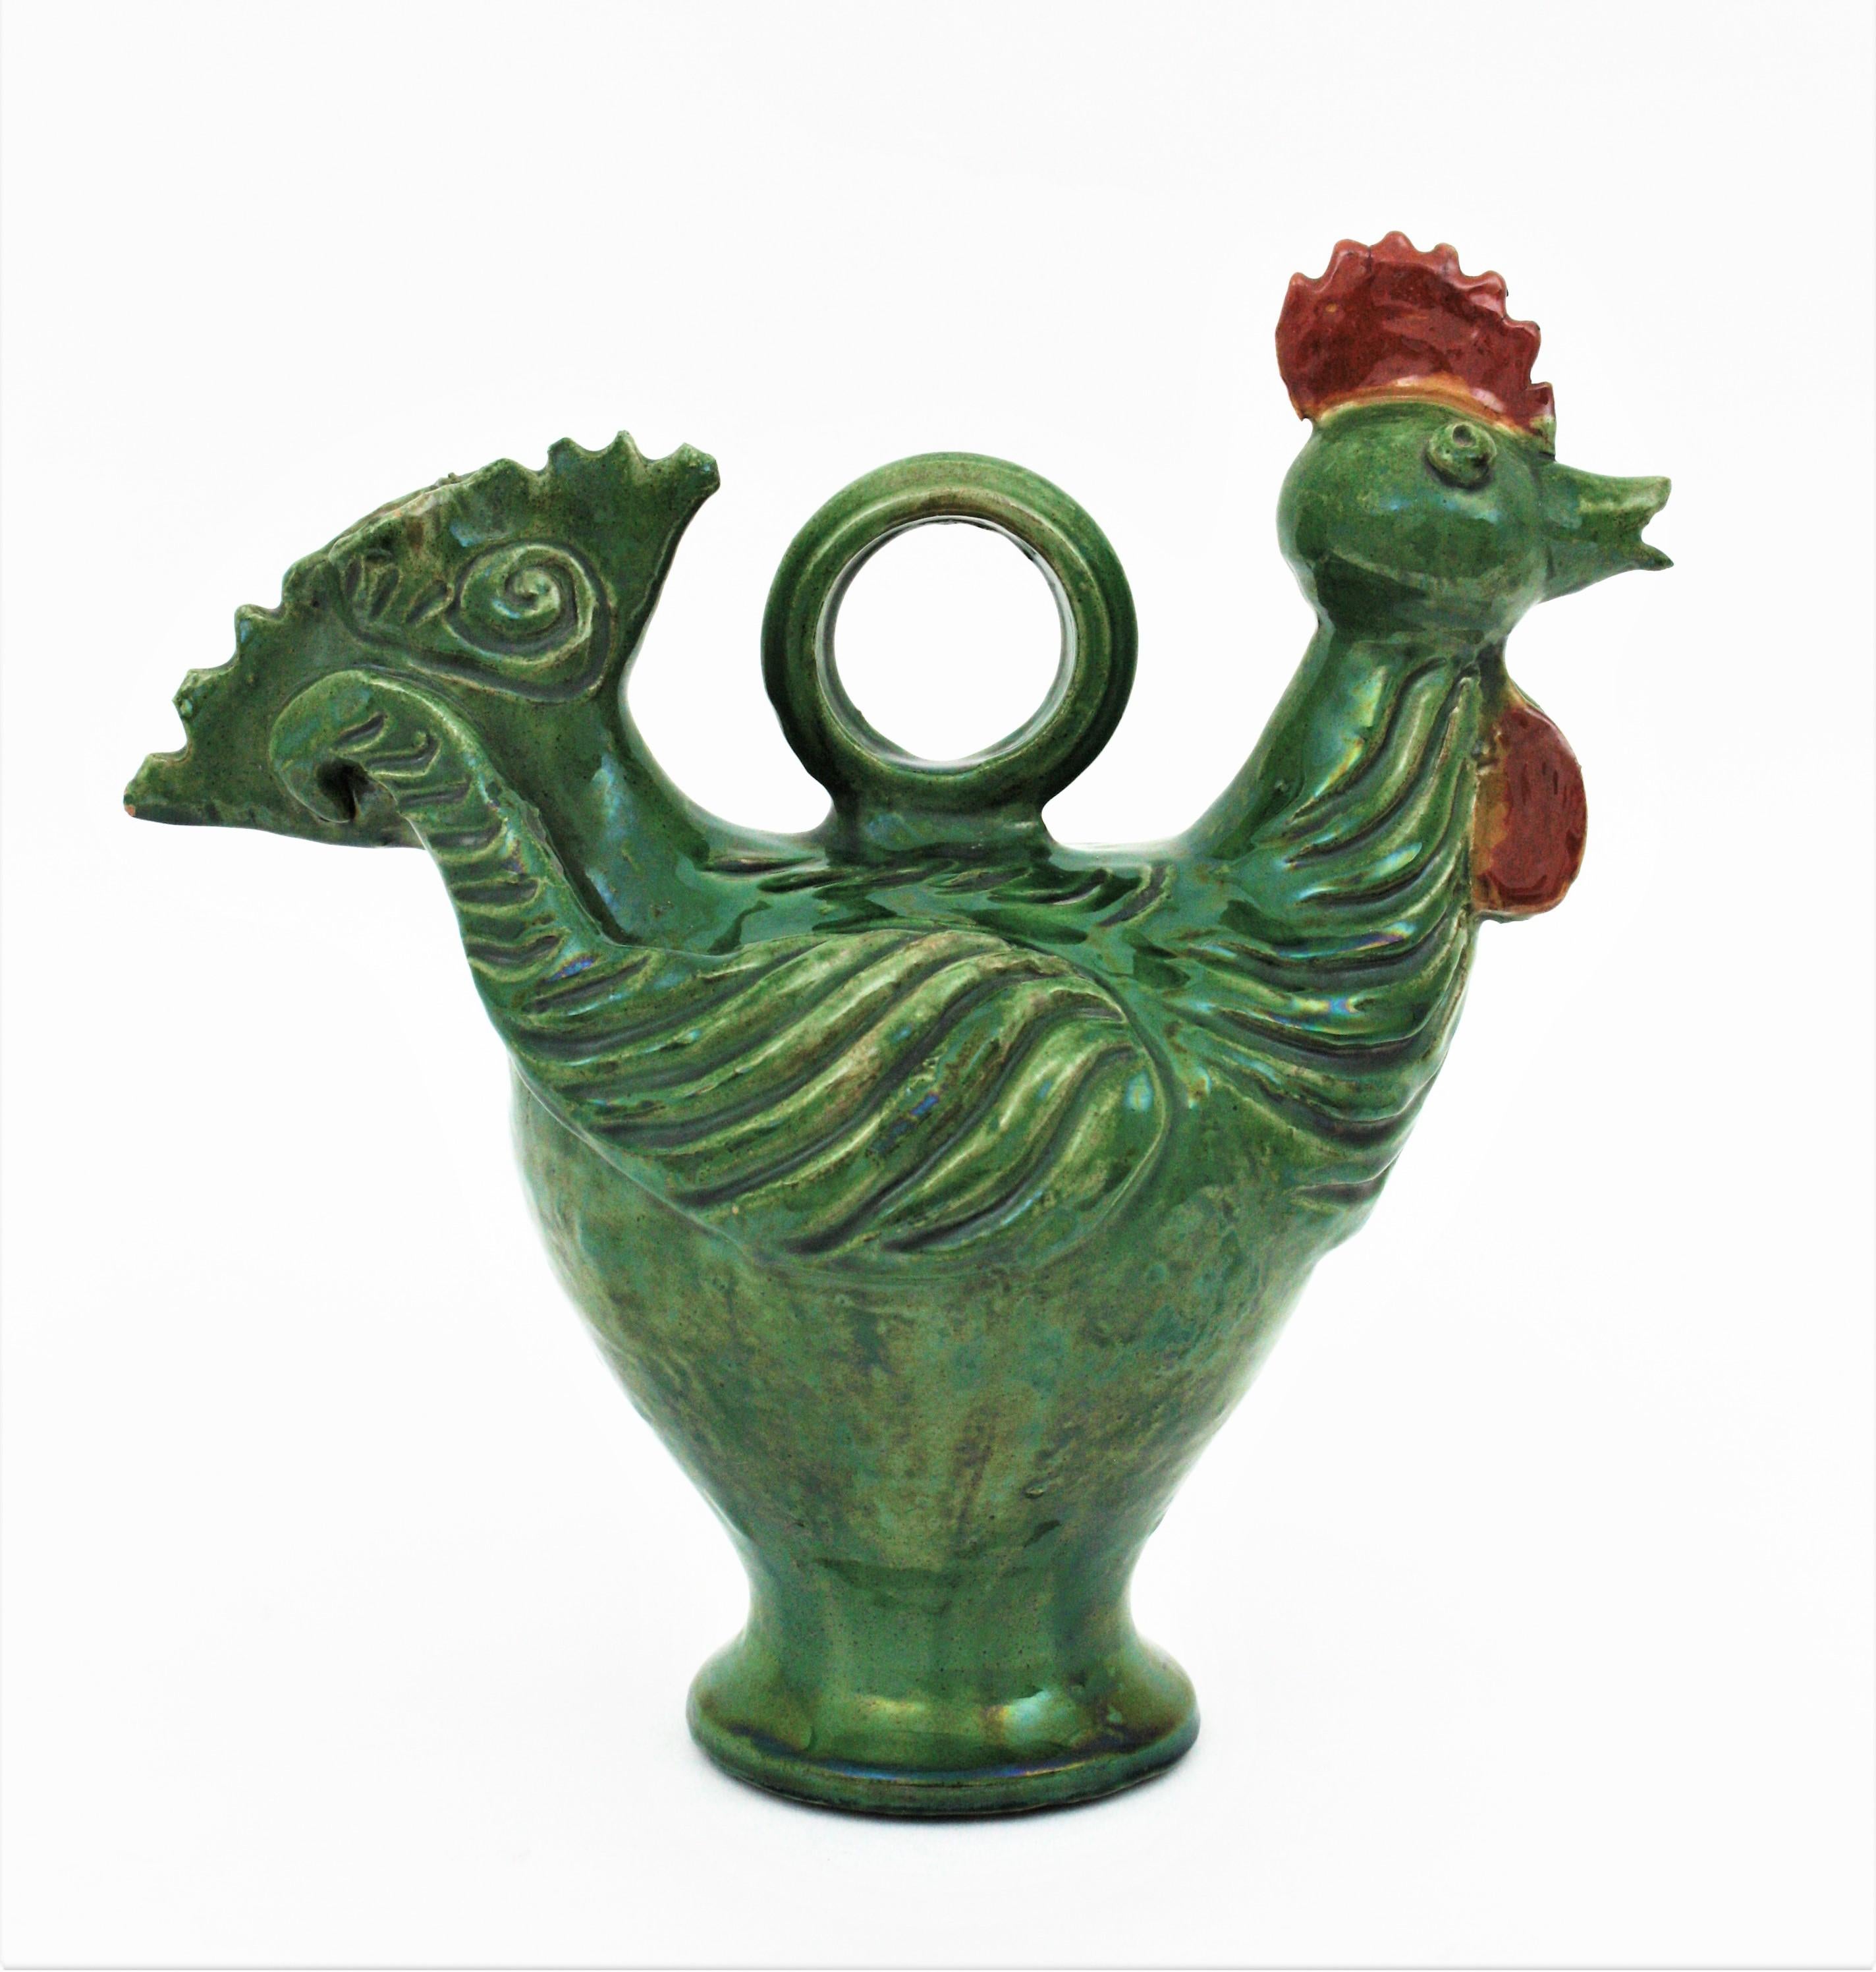 Eye-catching green and brown Majolica ceramic rooster jug / pitcher, Spain, 1950s.
Andalusian ceramic decorative rooster shaped jug in shades of green with brown accents. Traditionally used to contain water and preserve it fresh.
A cool accent to